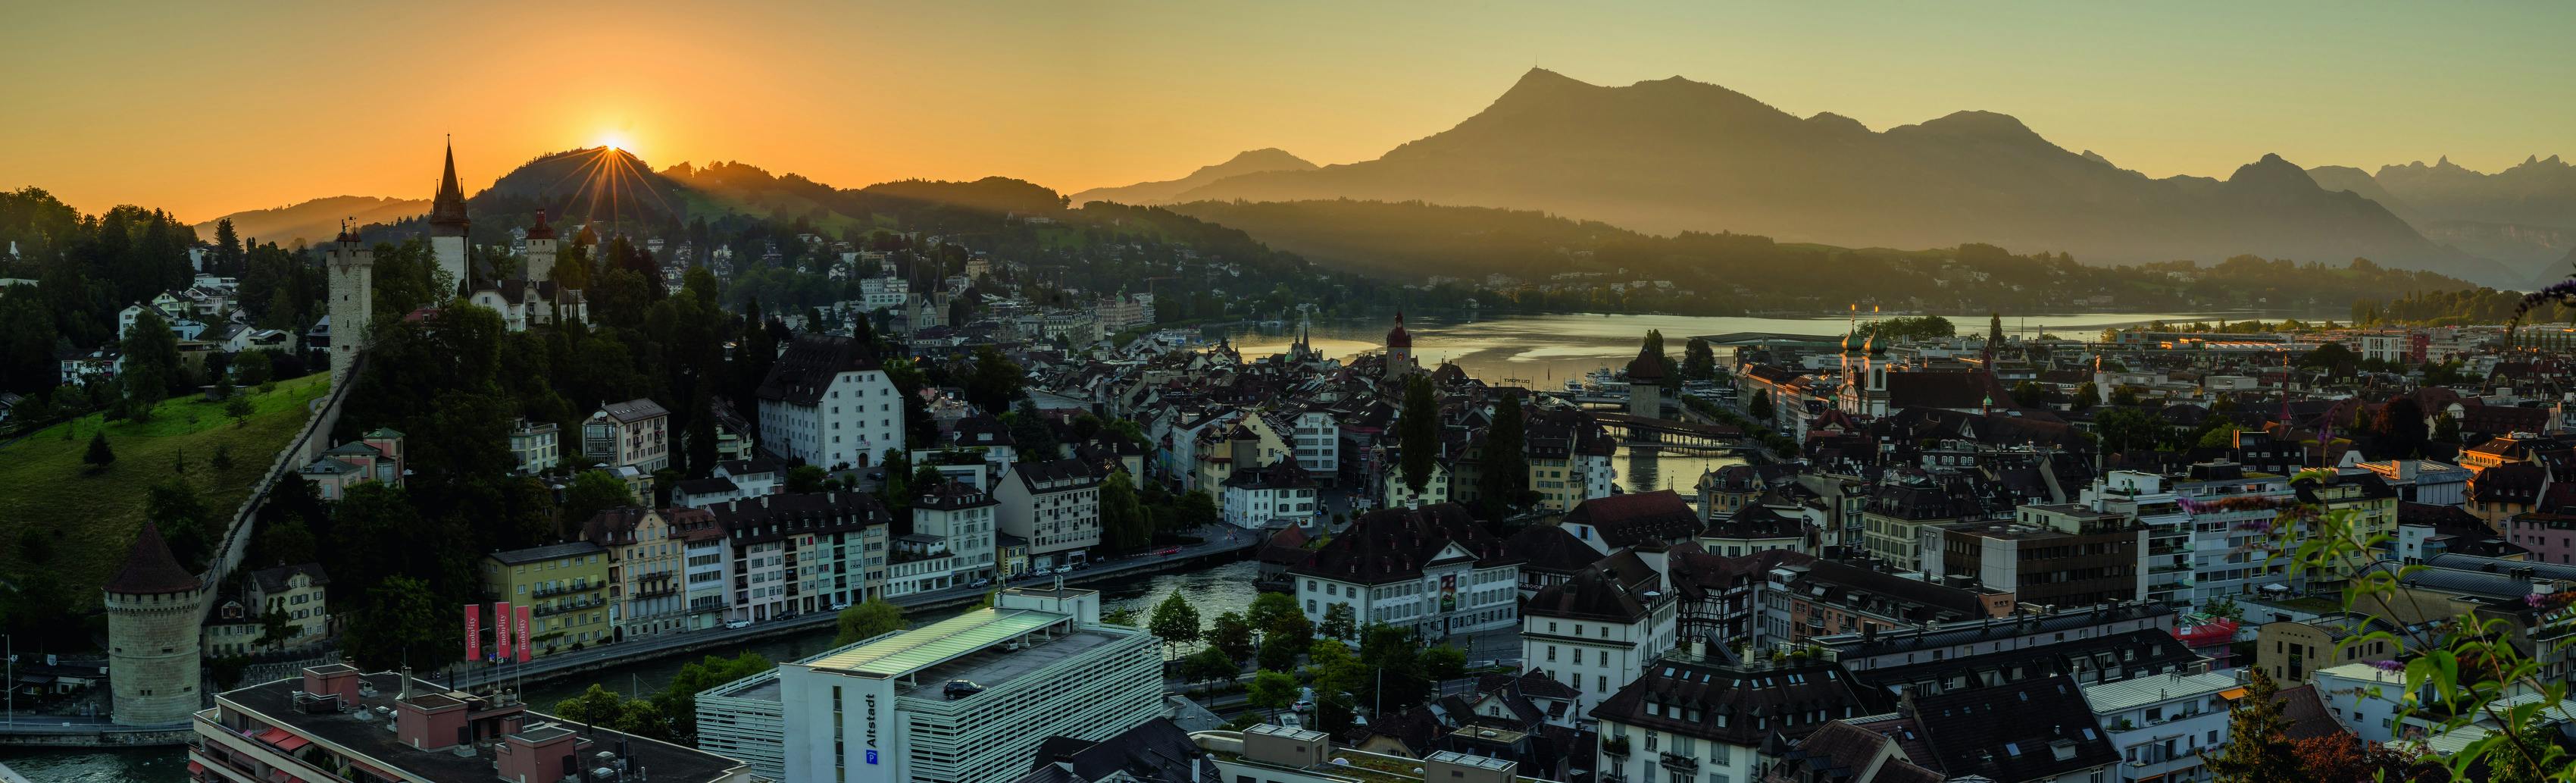 Sunrise over Lucerne with the Rigi in the background